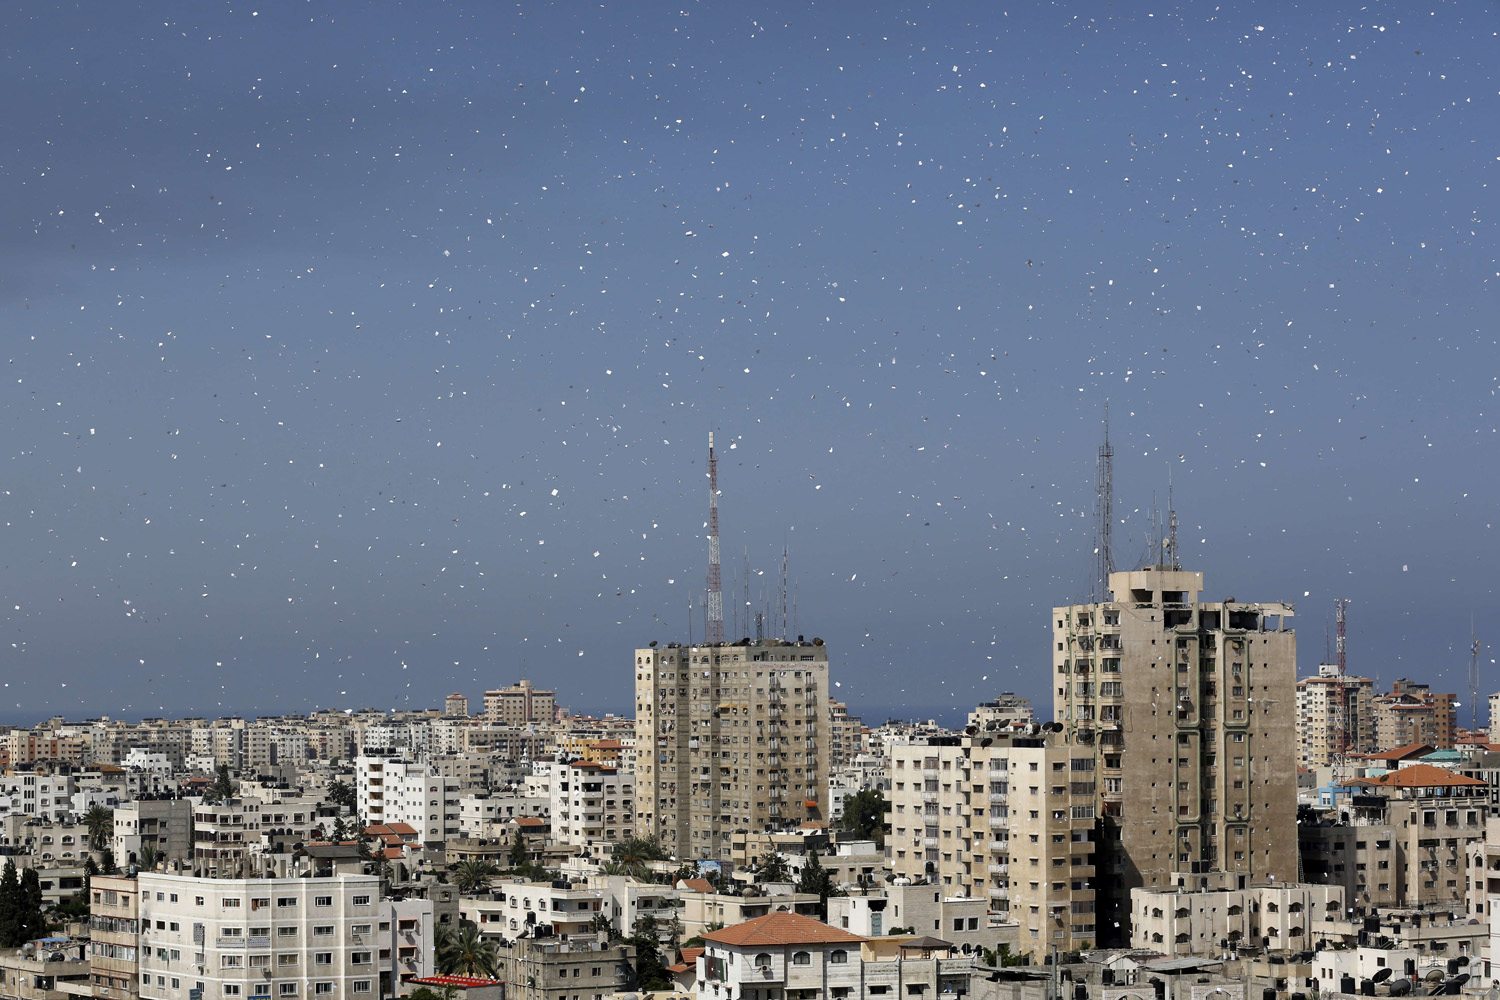 Flyers are dropped over Gaza City by the Israeli army urging residents to evacuate their homes on July 30, 2014.